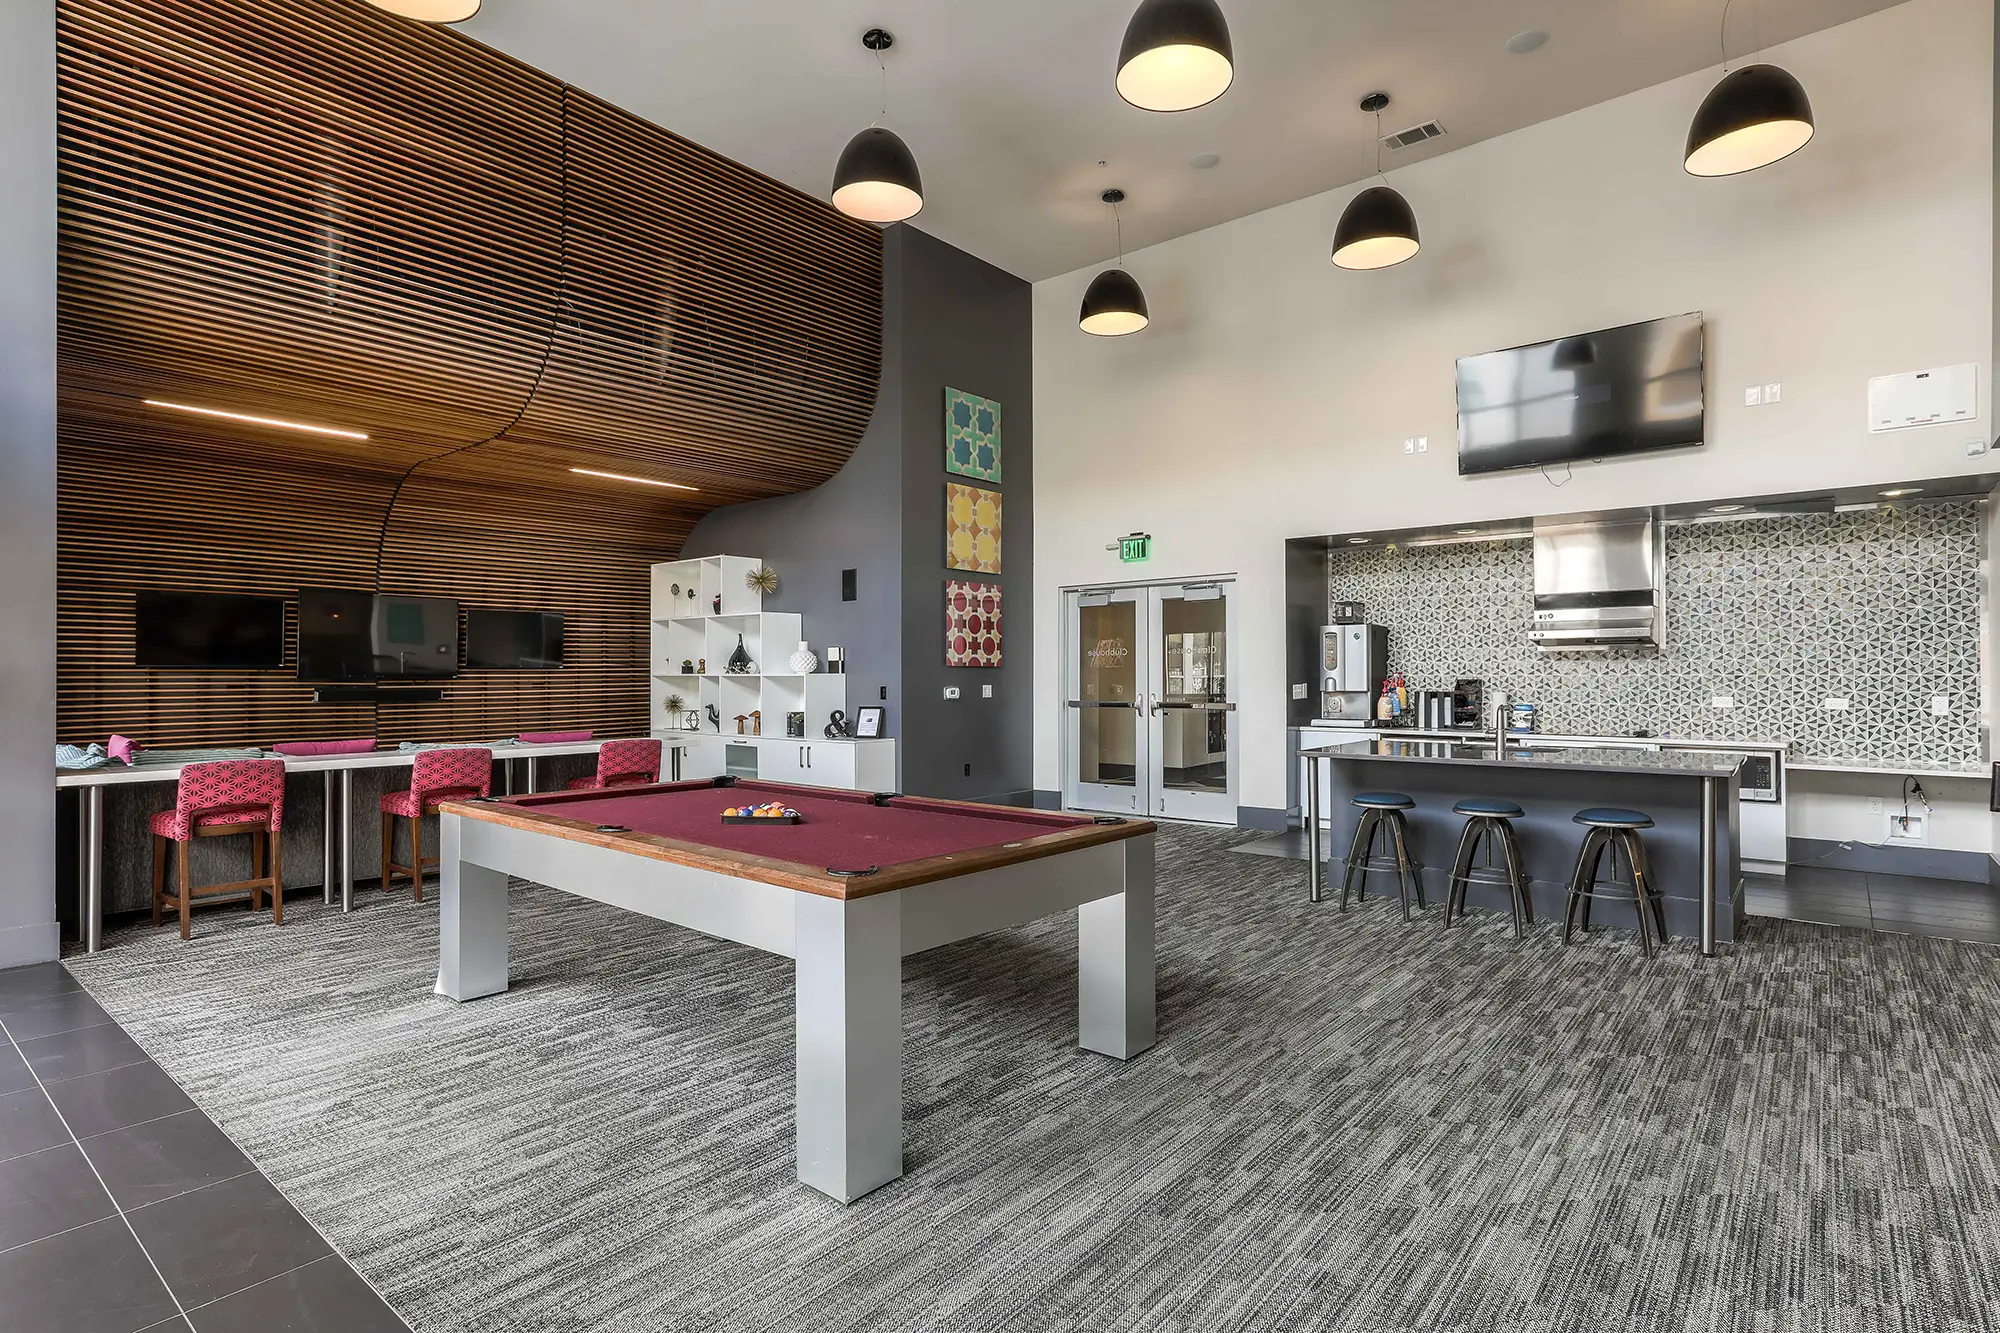 Clubhouse game room with pool table and kitchen